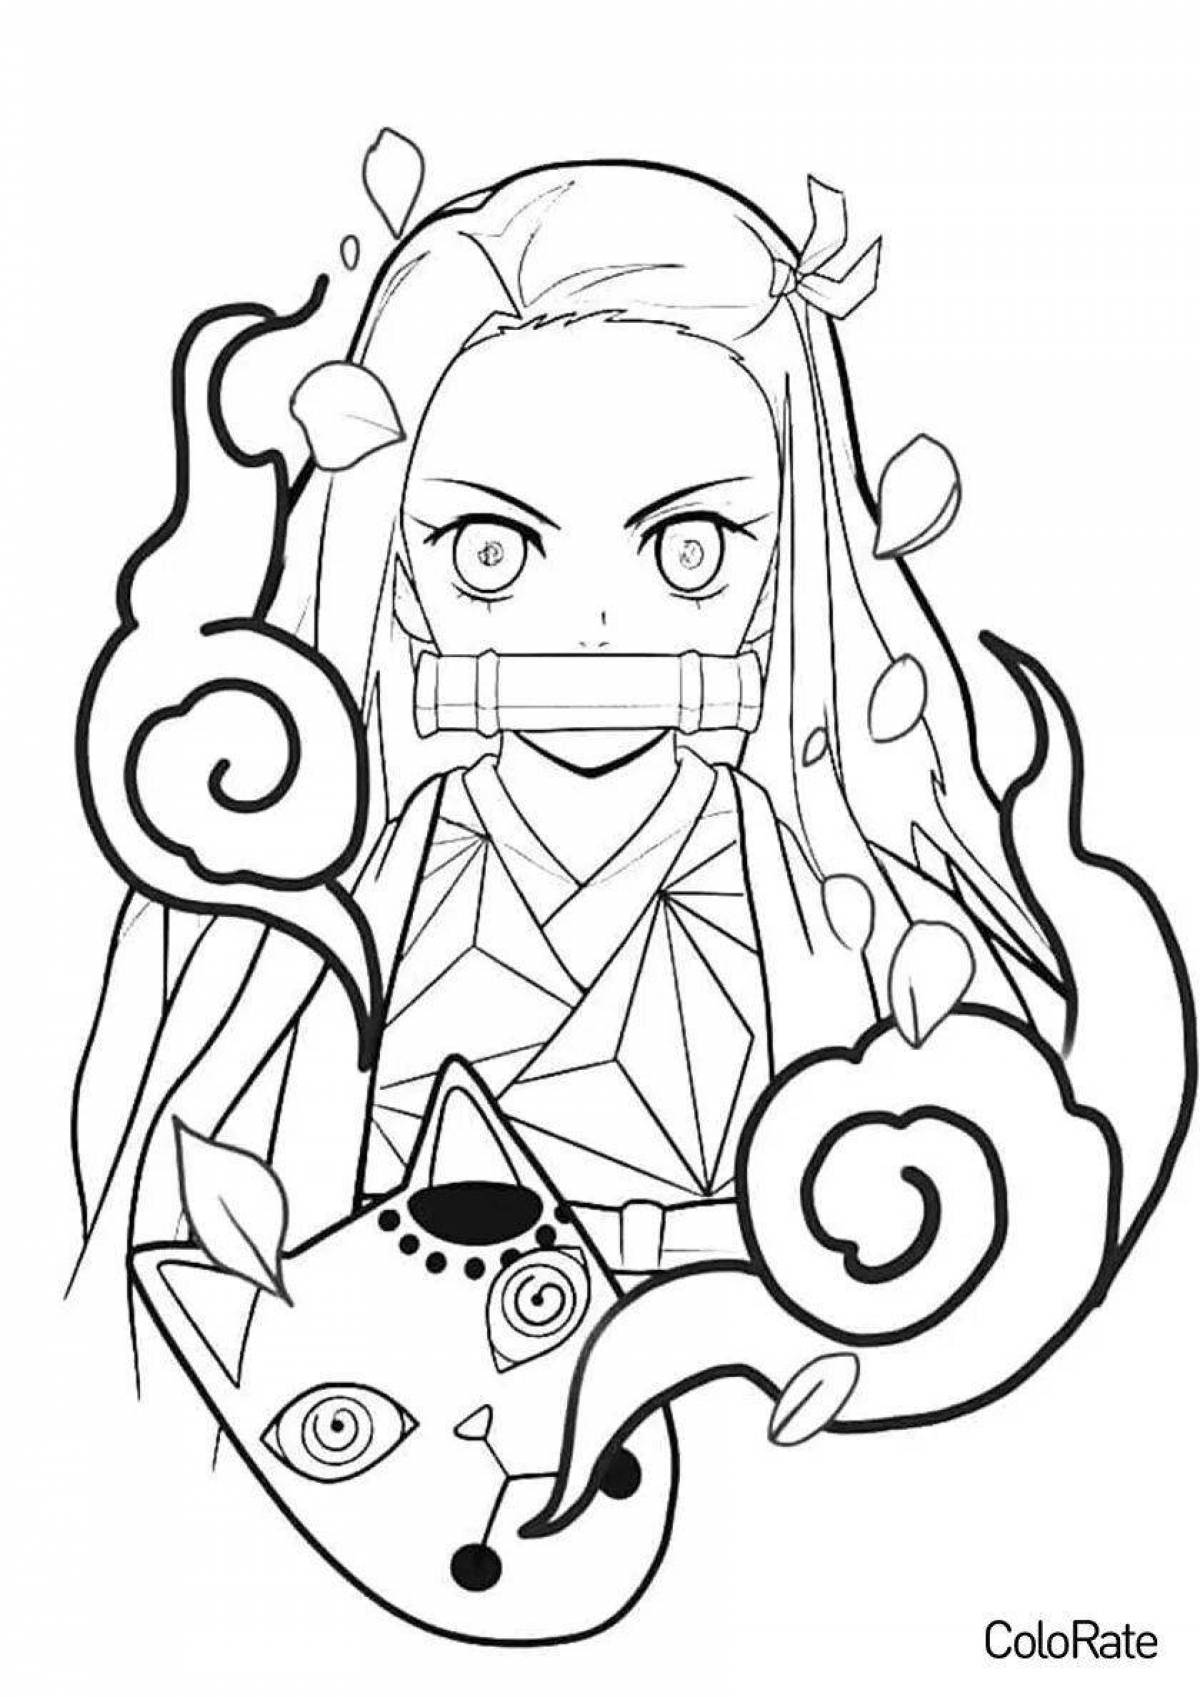 Awesome chibi demon cleaver coloring page